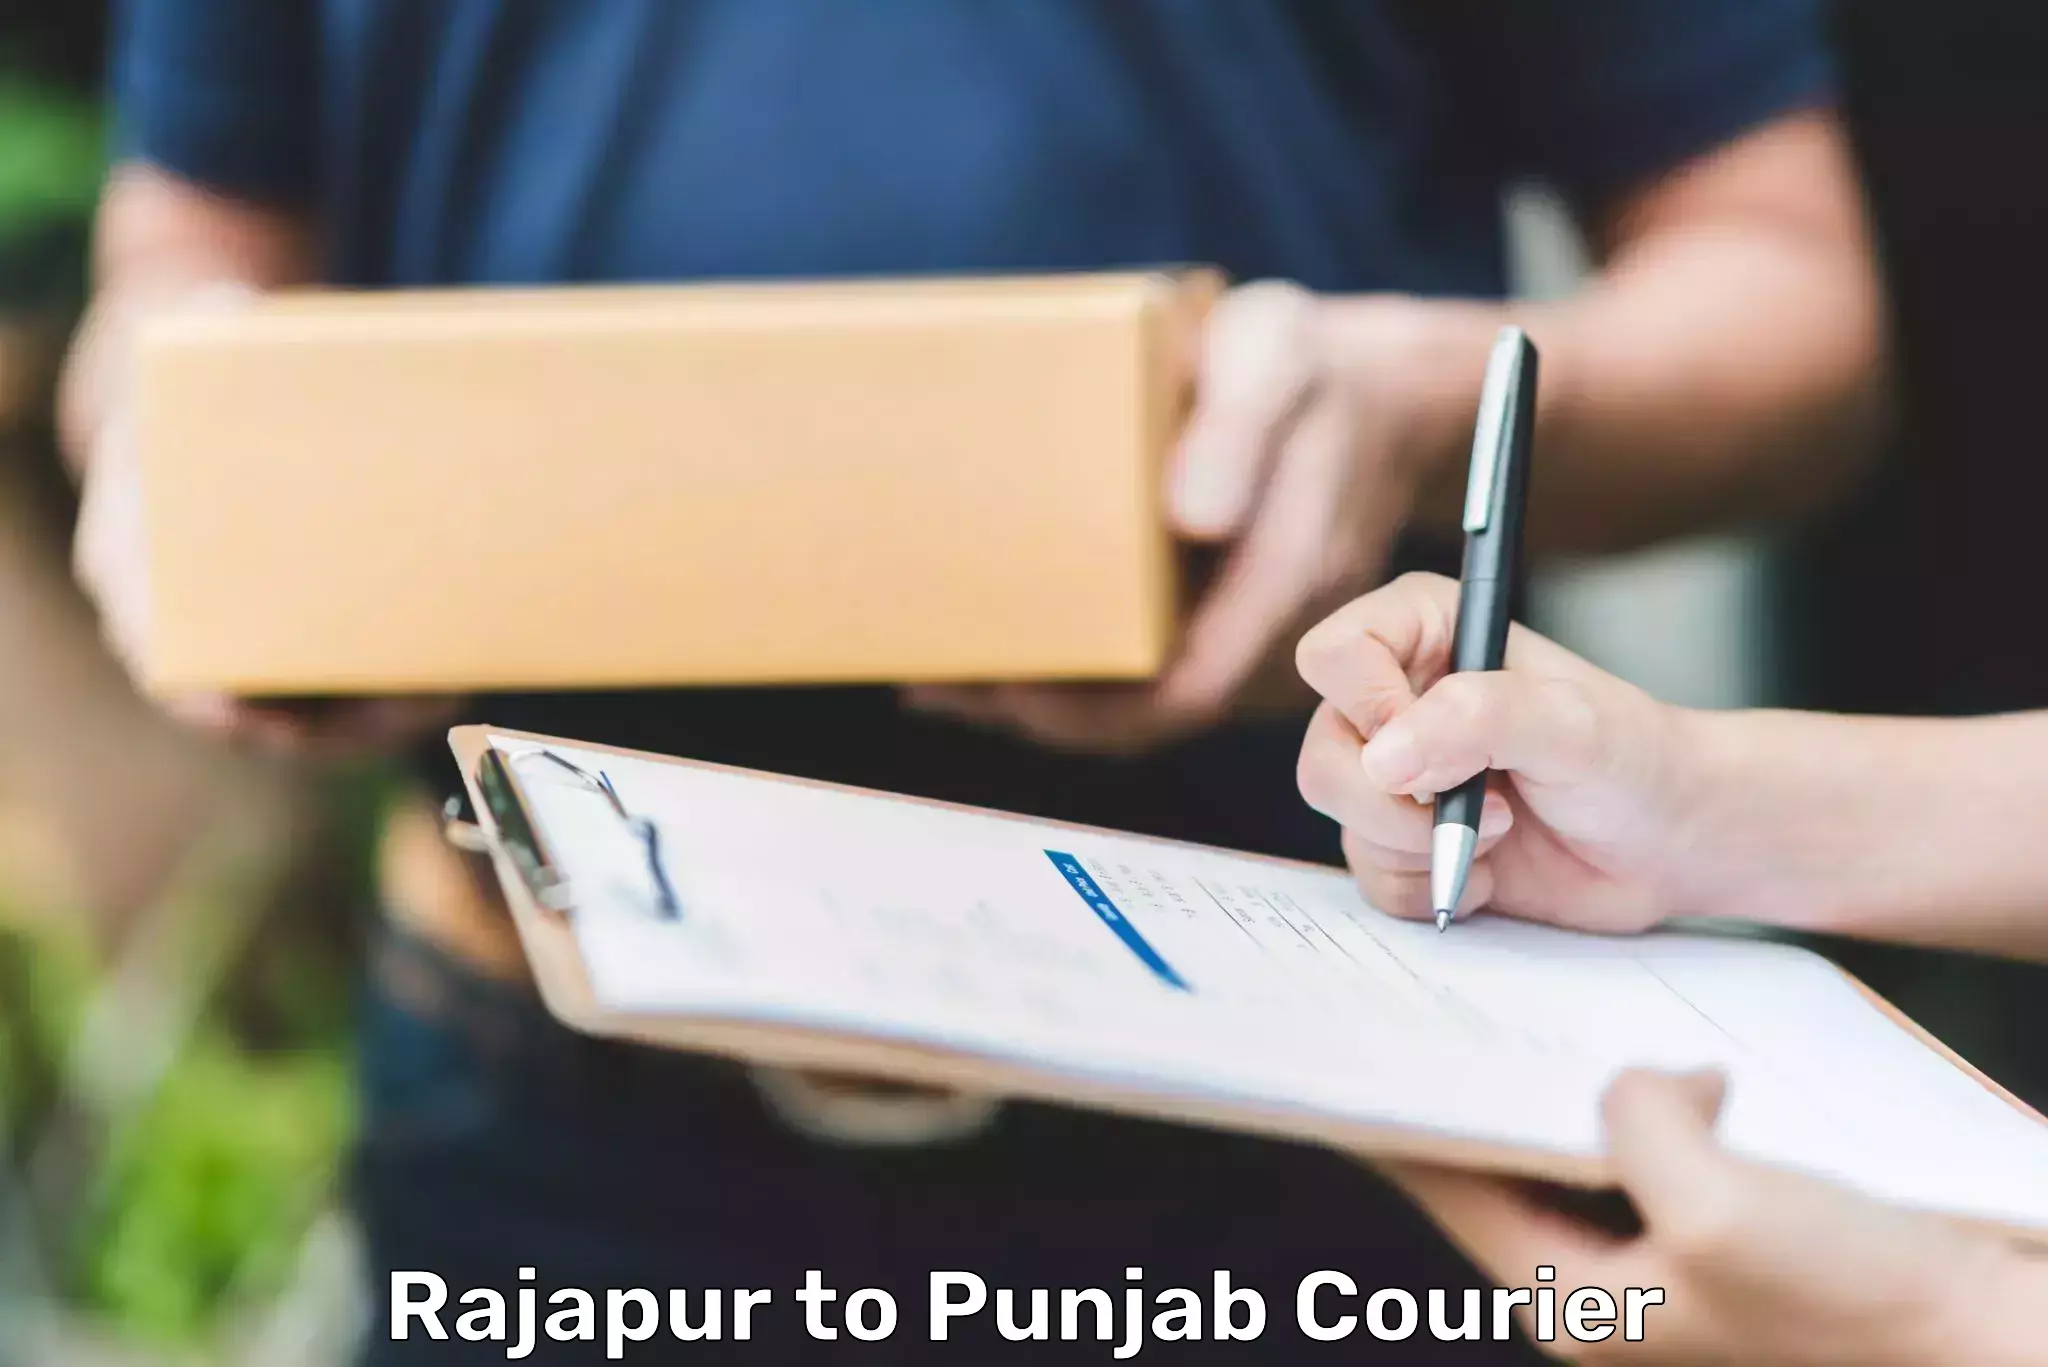 Courier service innovation Rajapur to Mohali